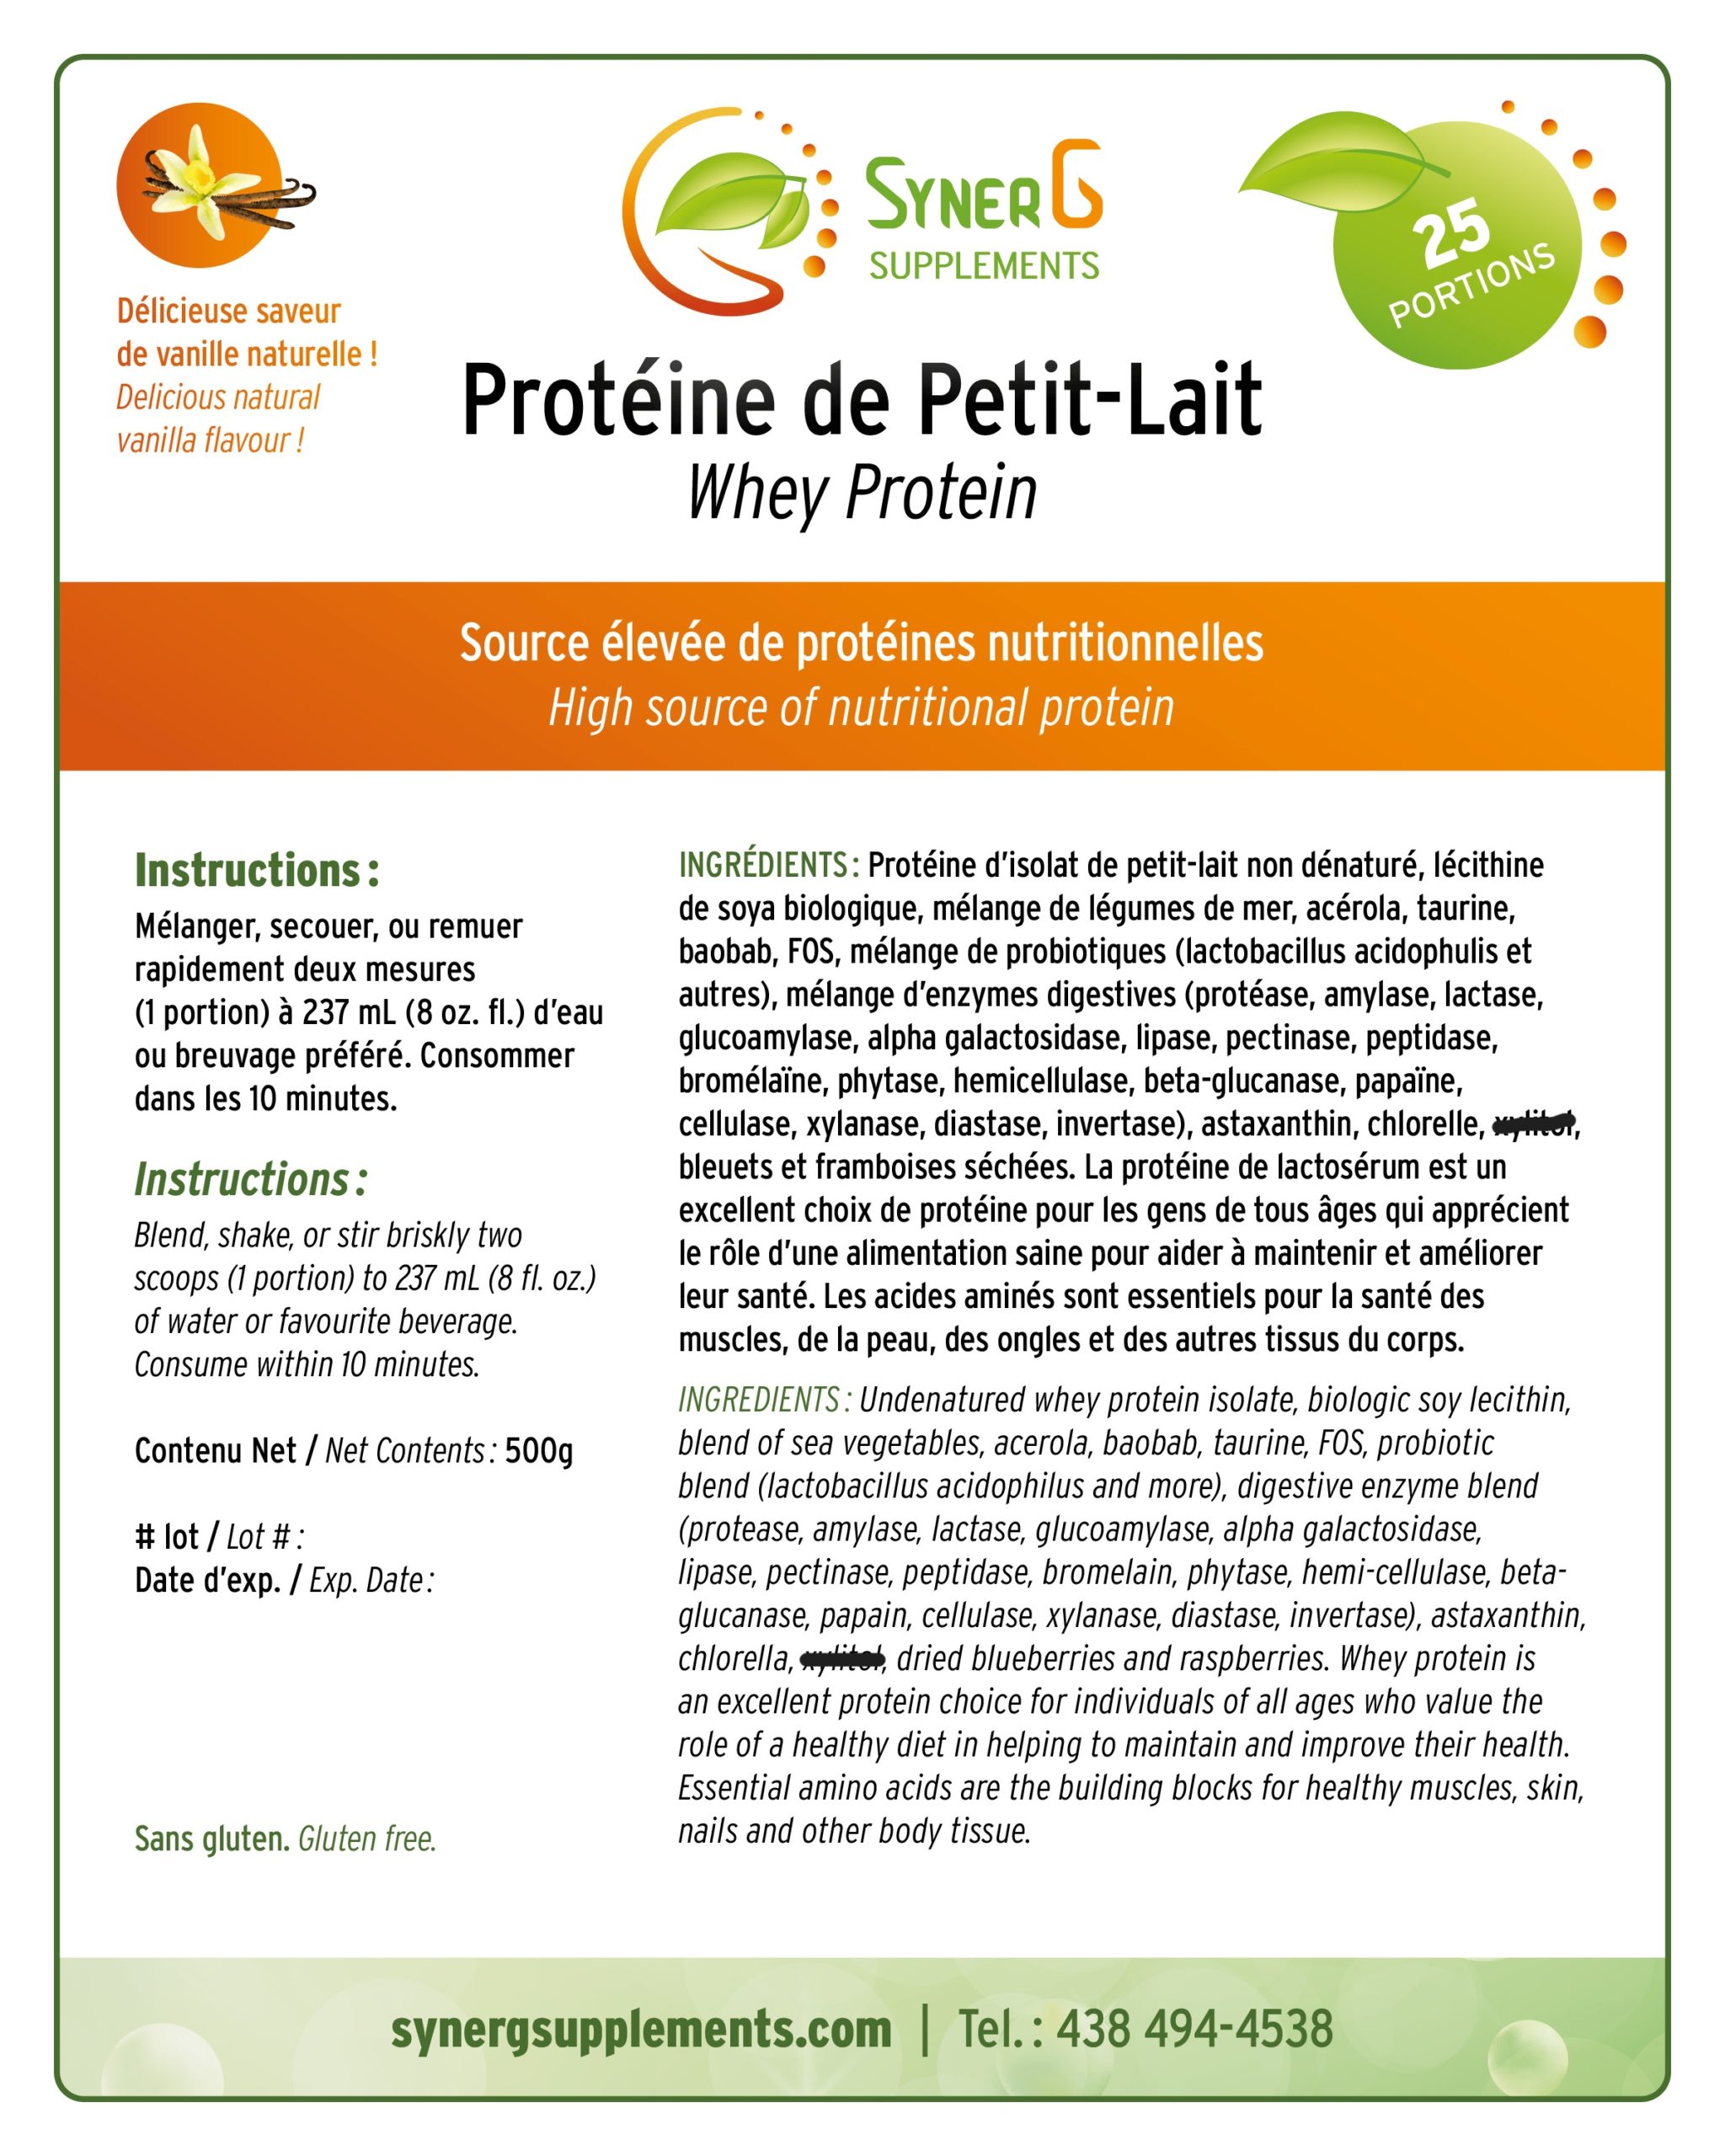 SG_ProteinePetitLait500g-2